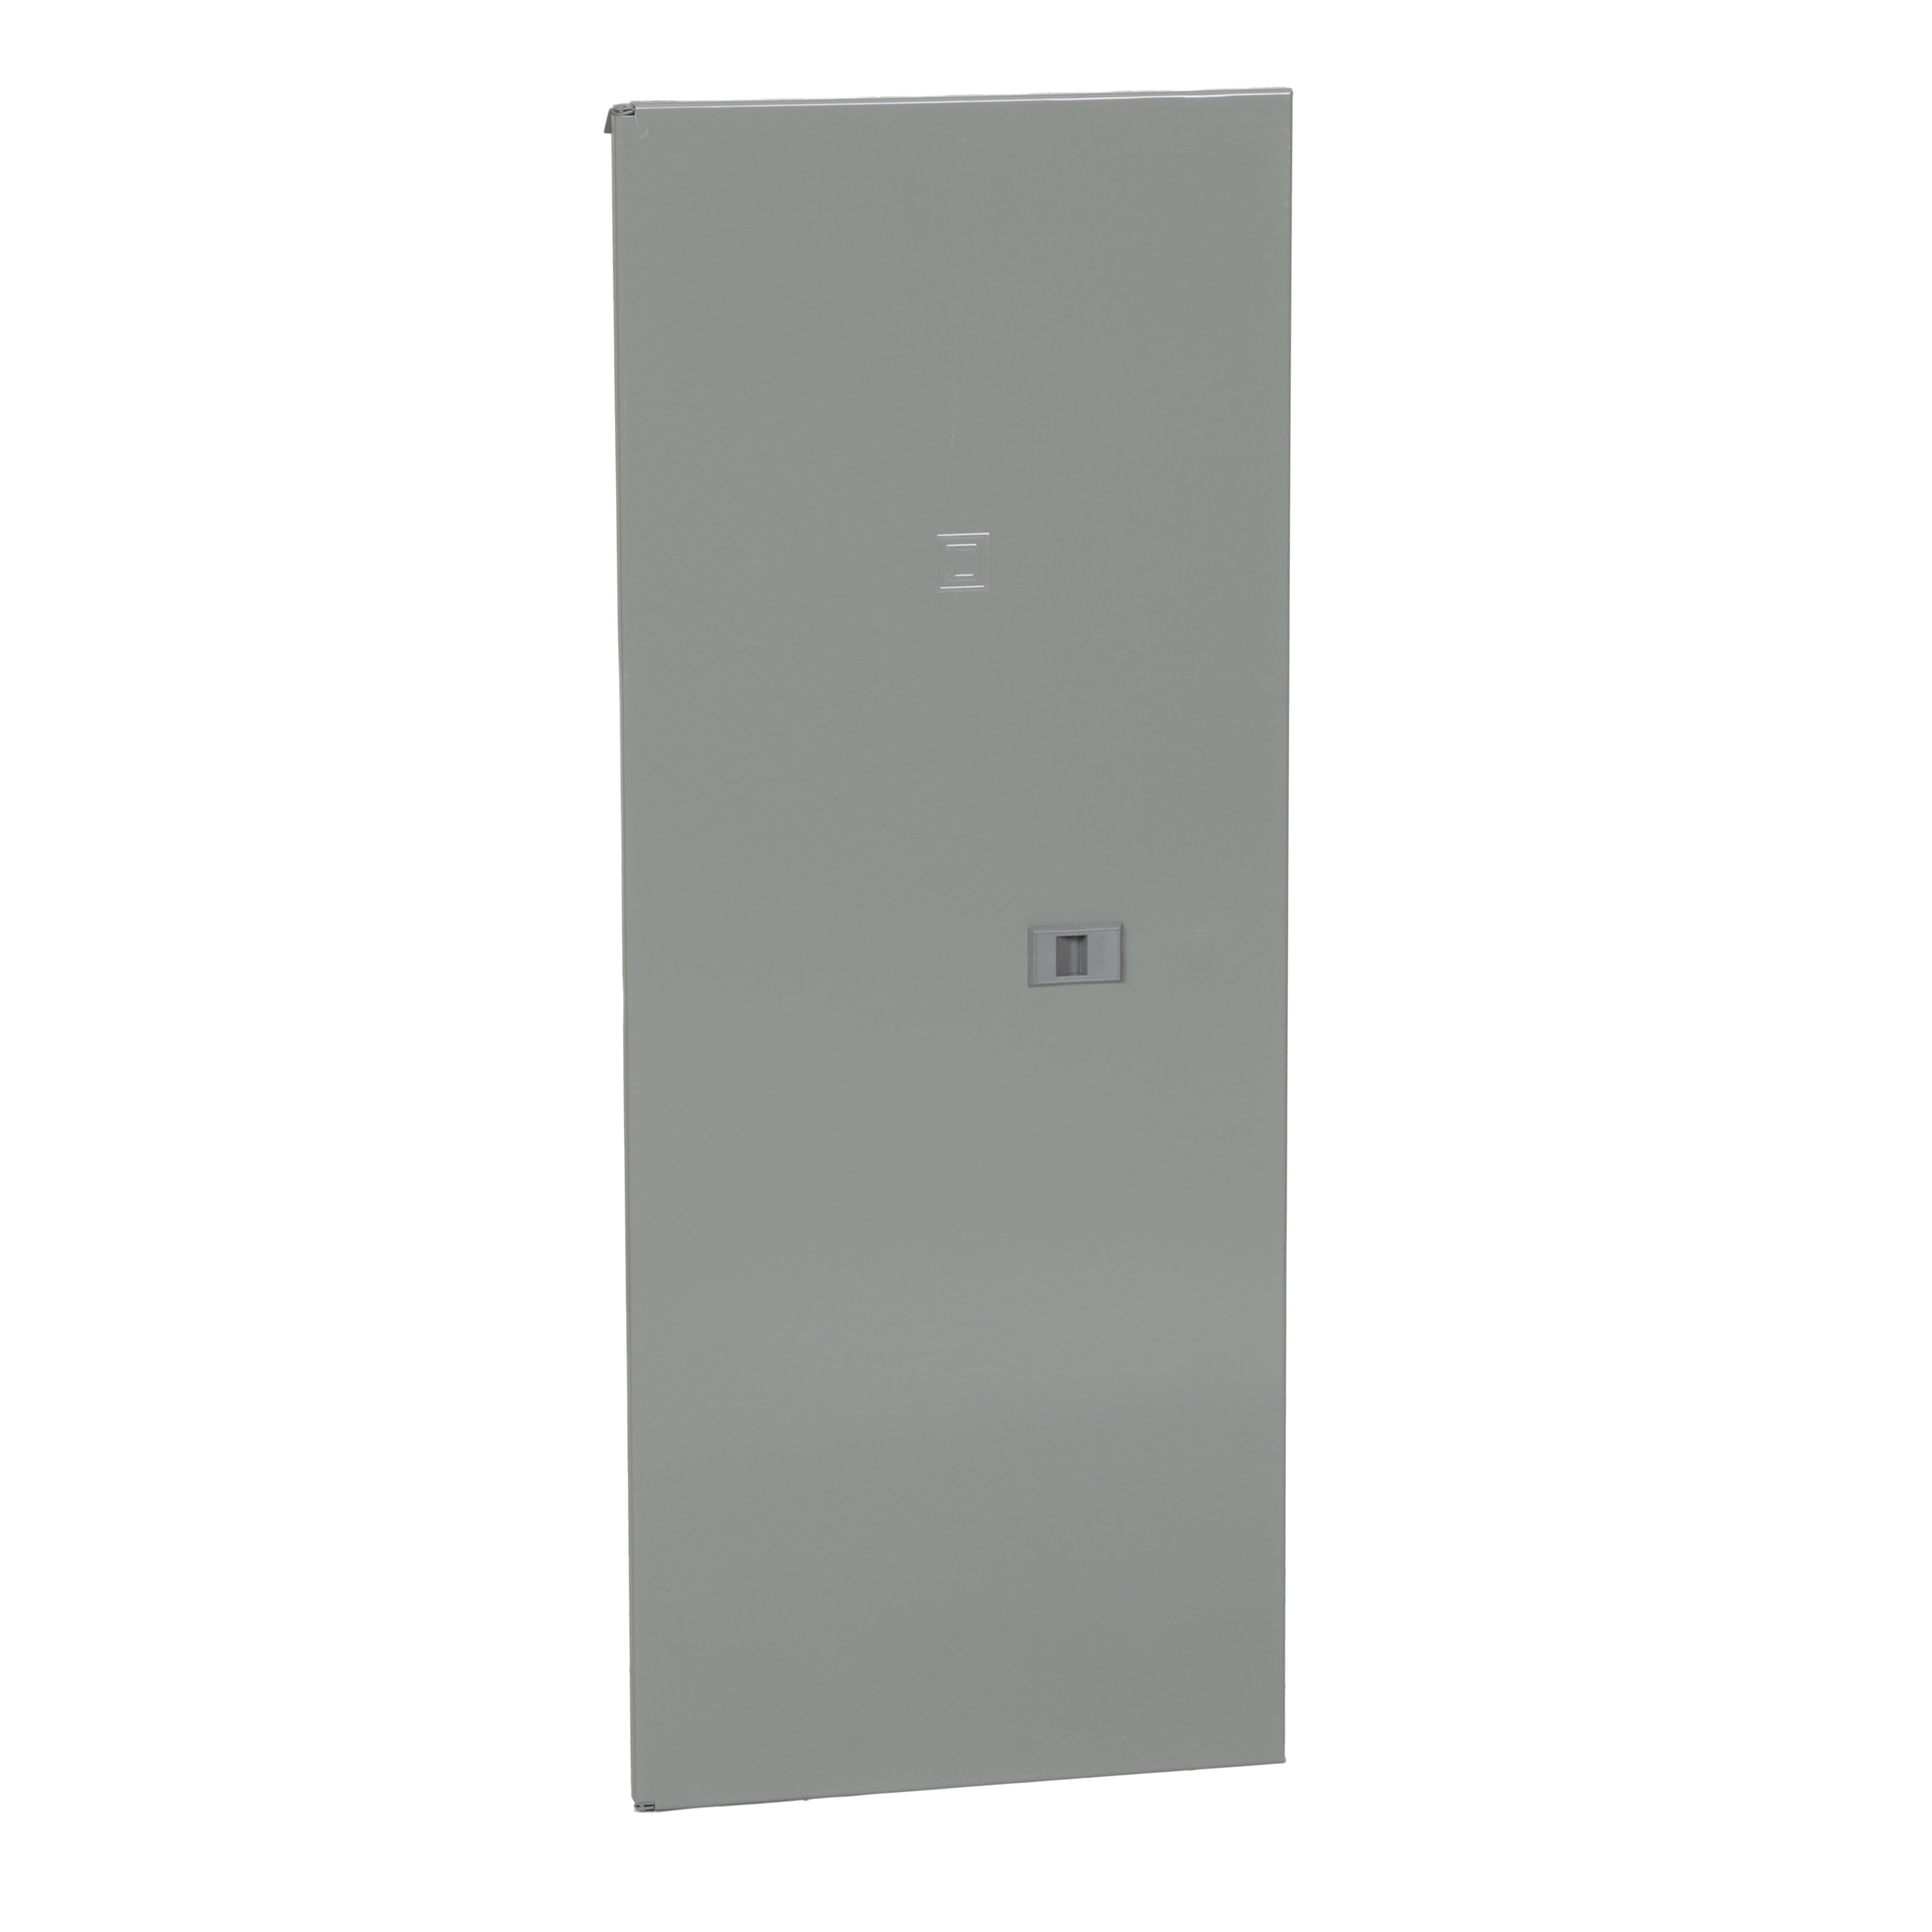 Replacement cover, QO, for 60 space load center, door, flush